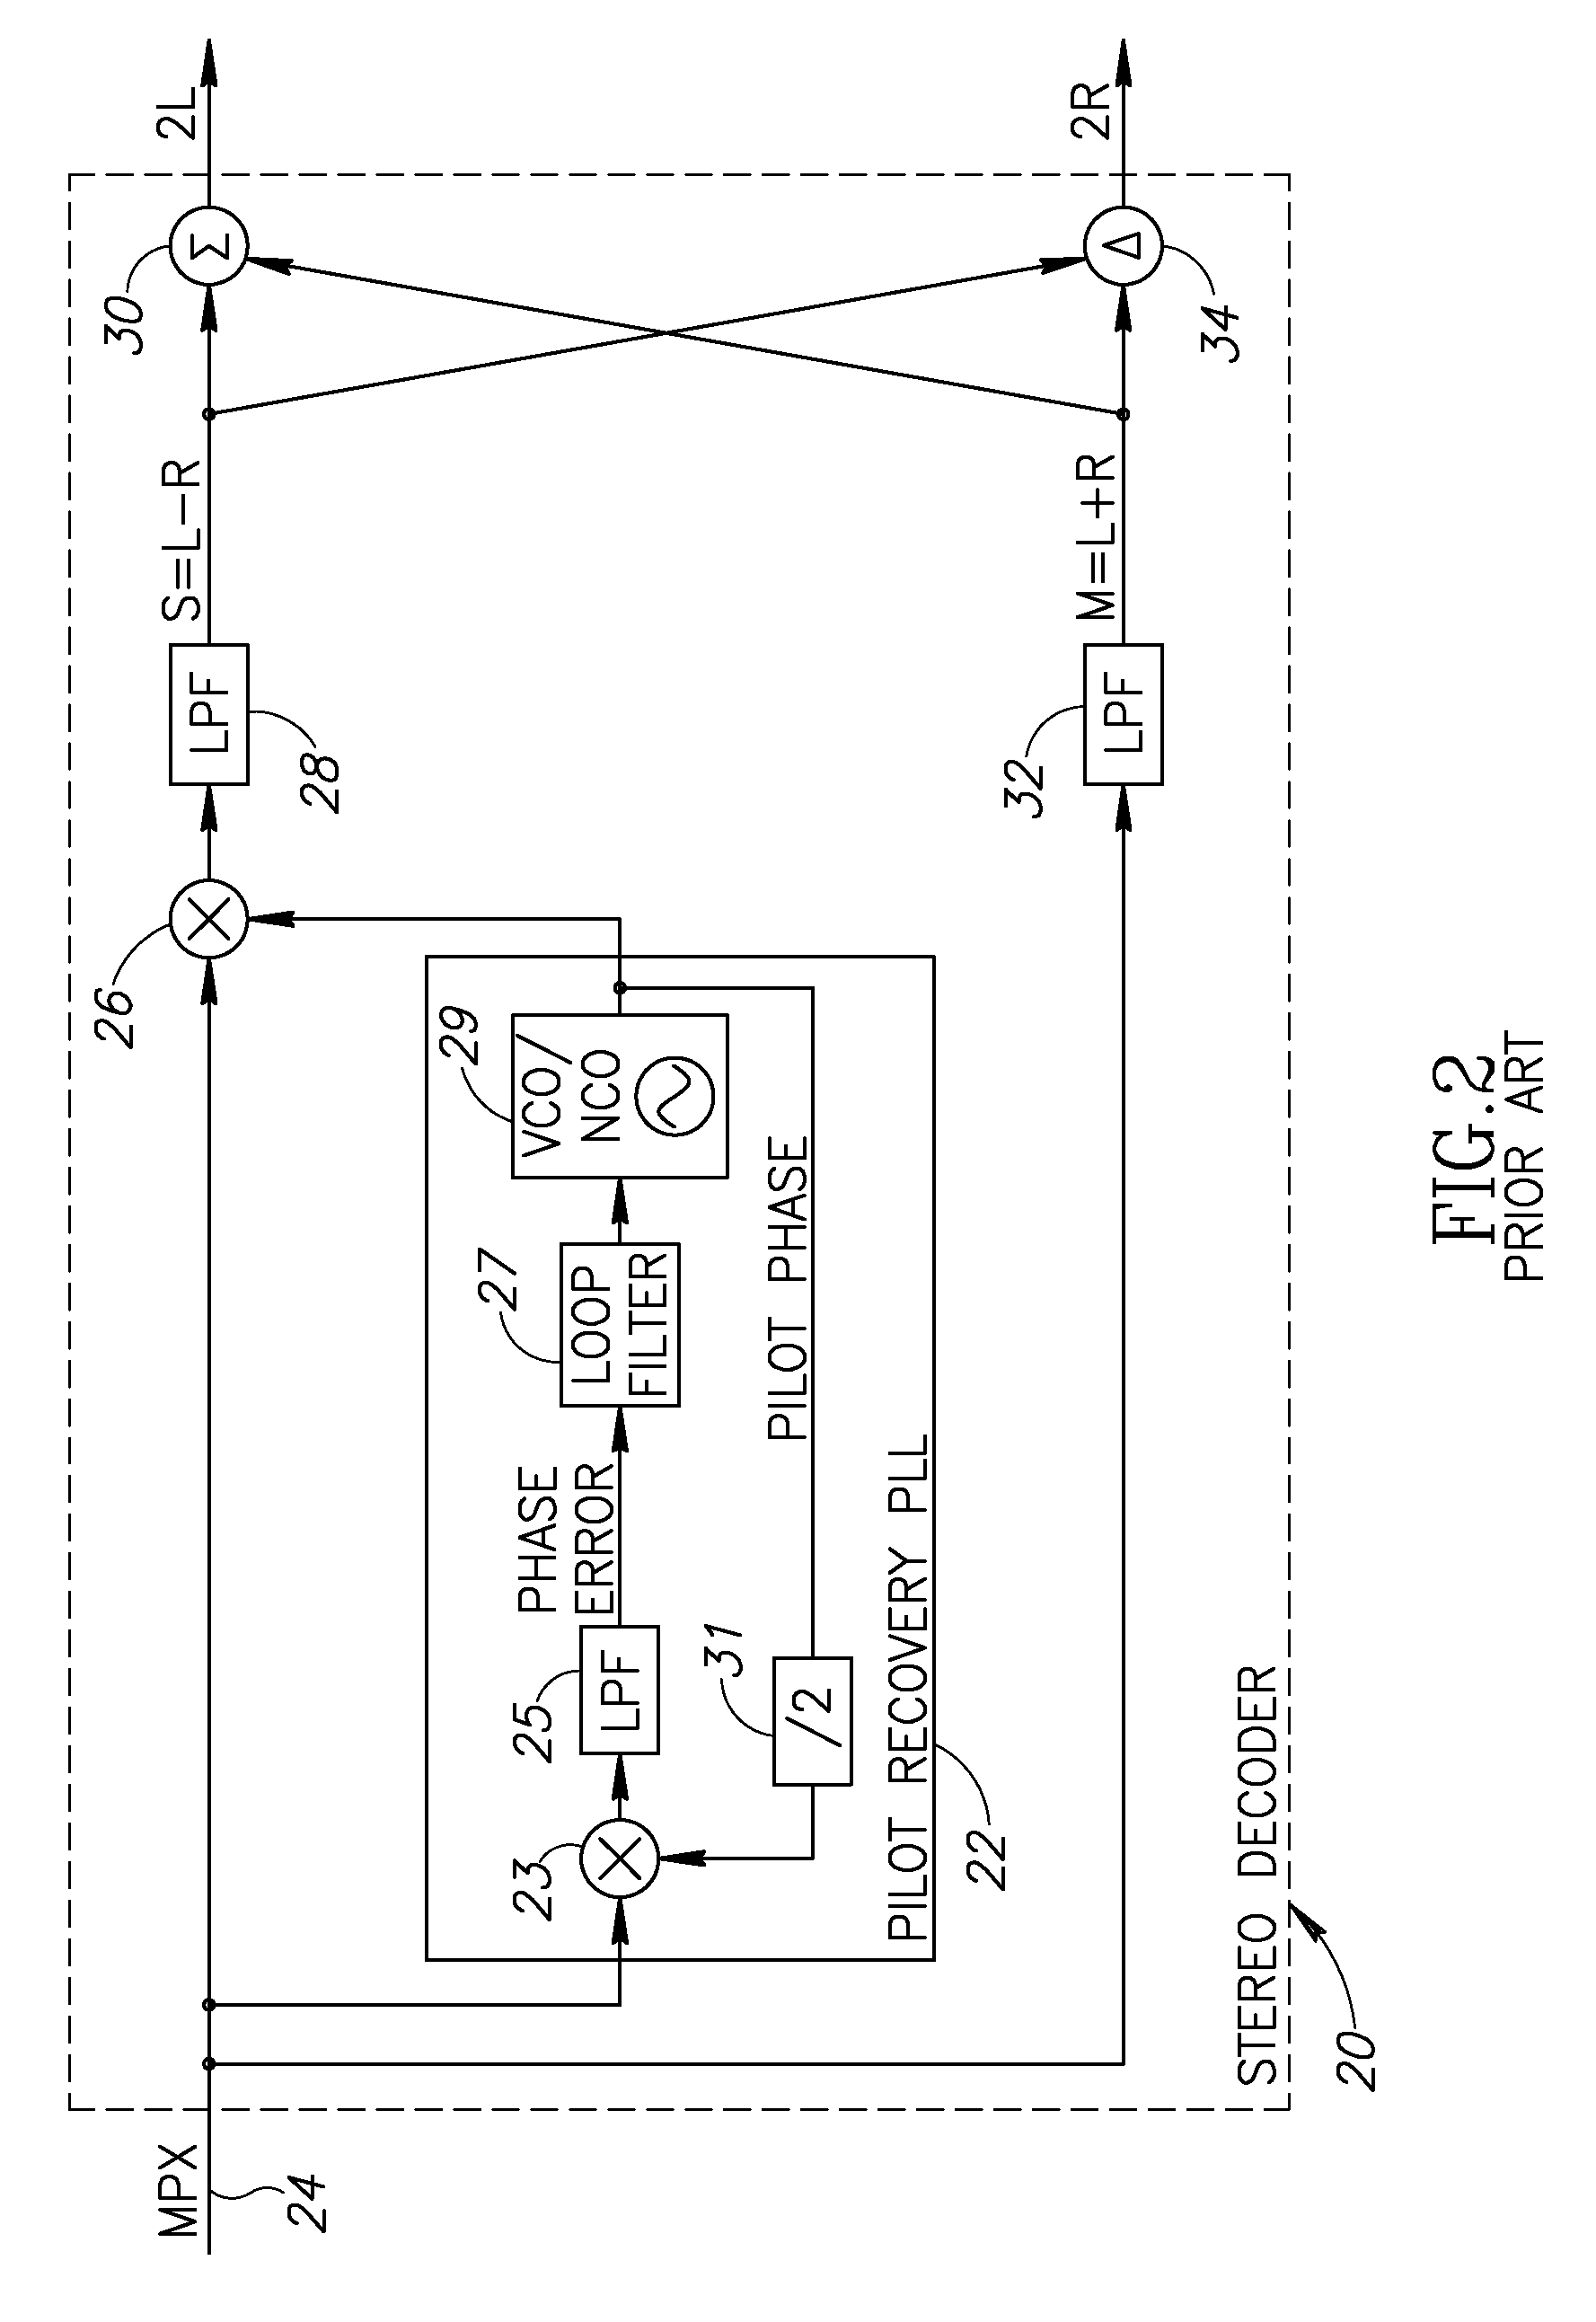 FM stereo decoder incorporating costas loop pilot to stereo component phase correction